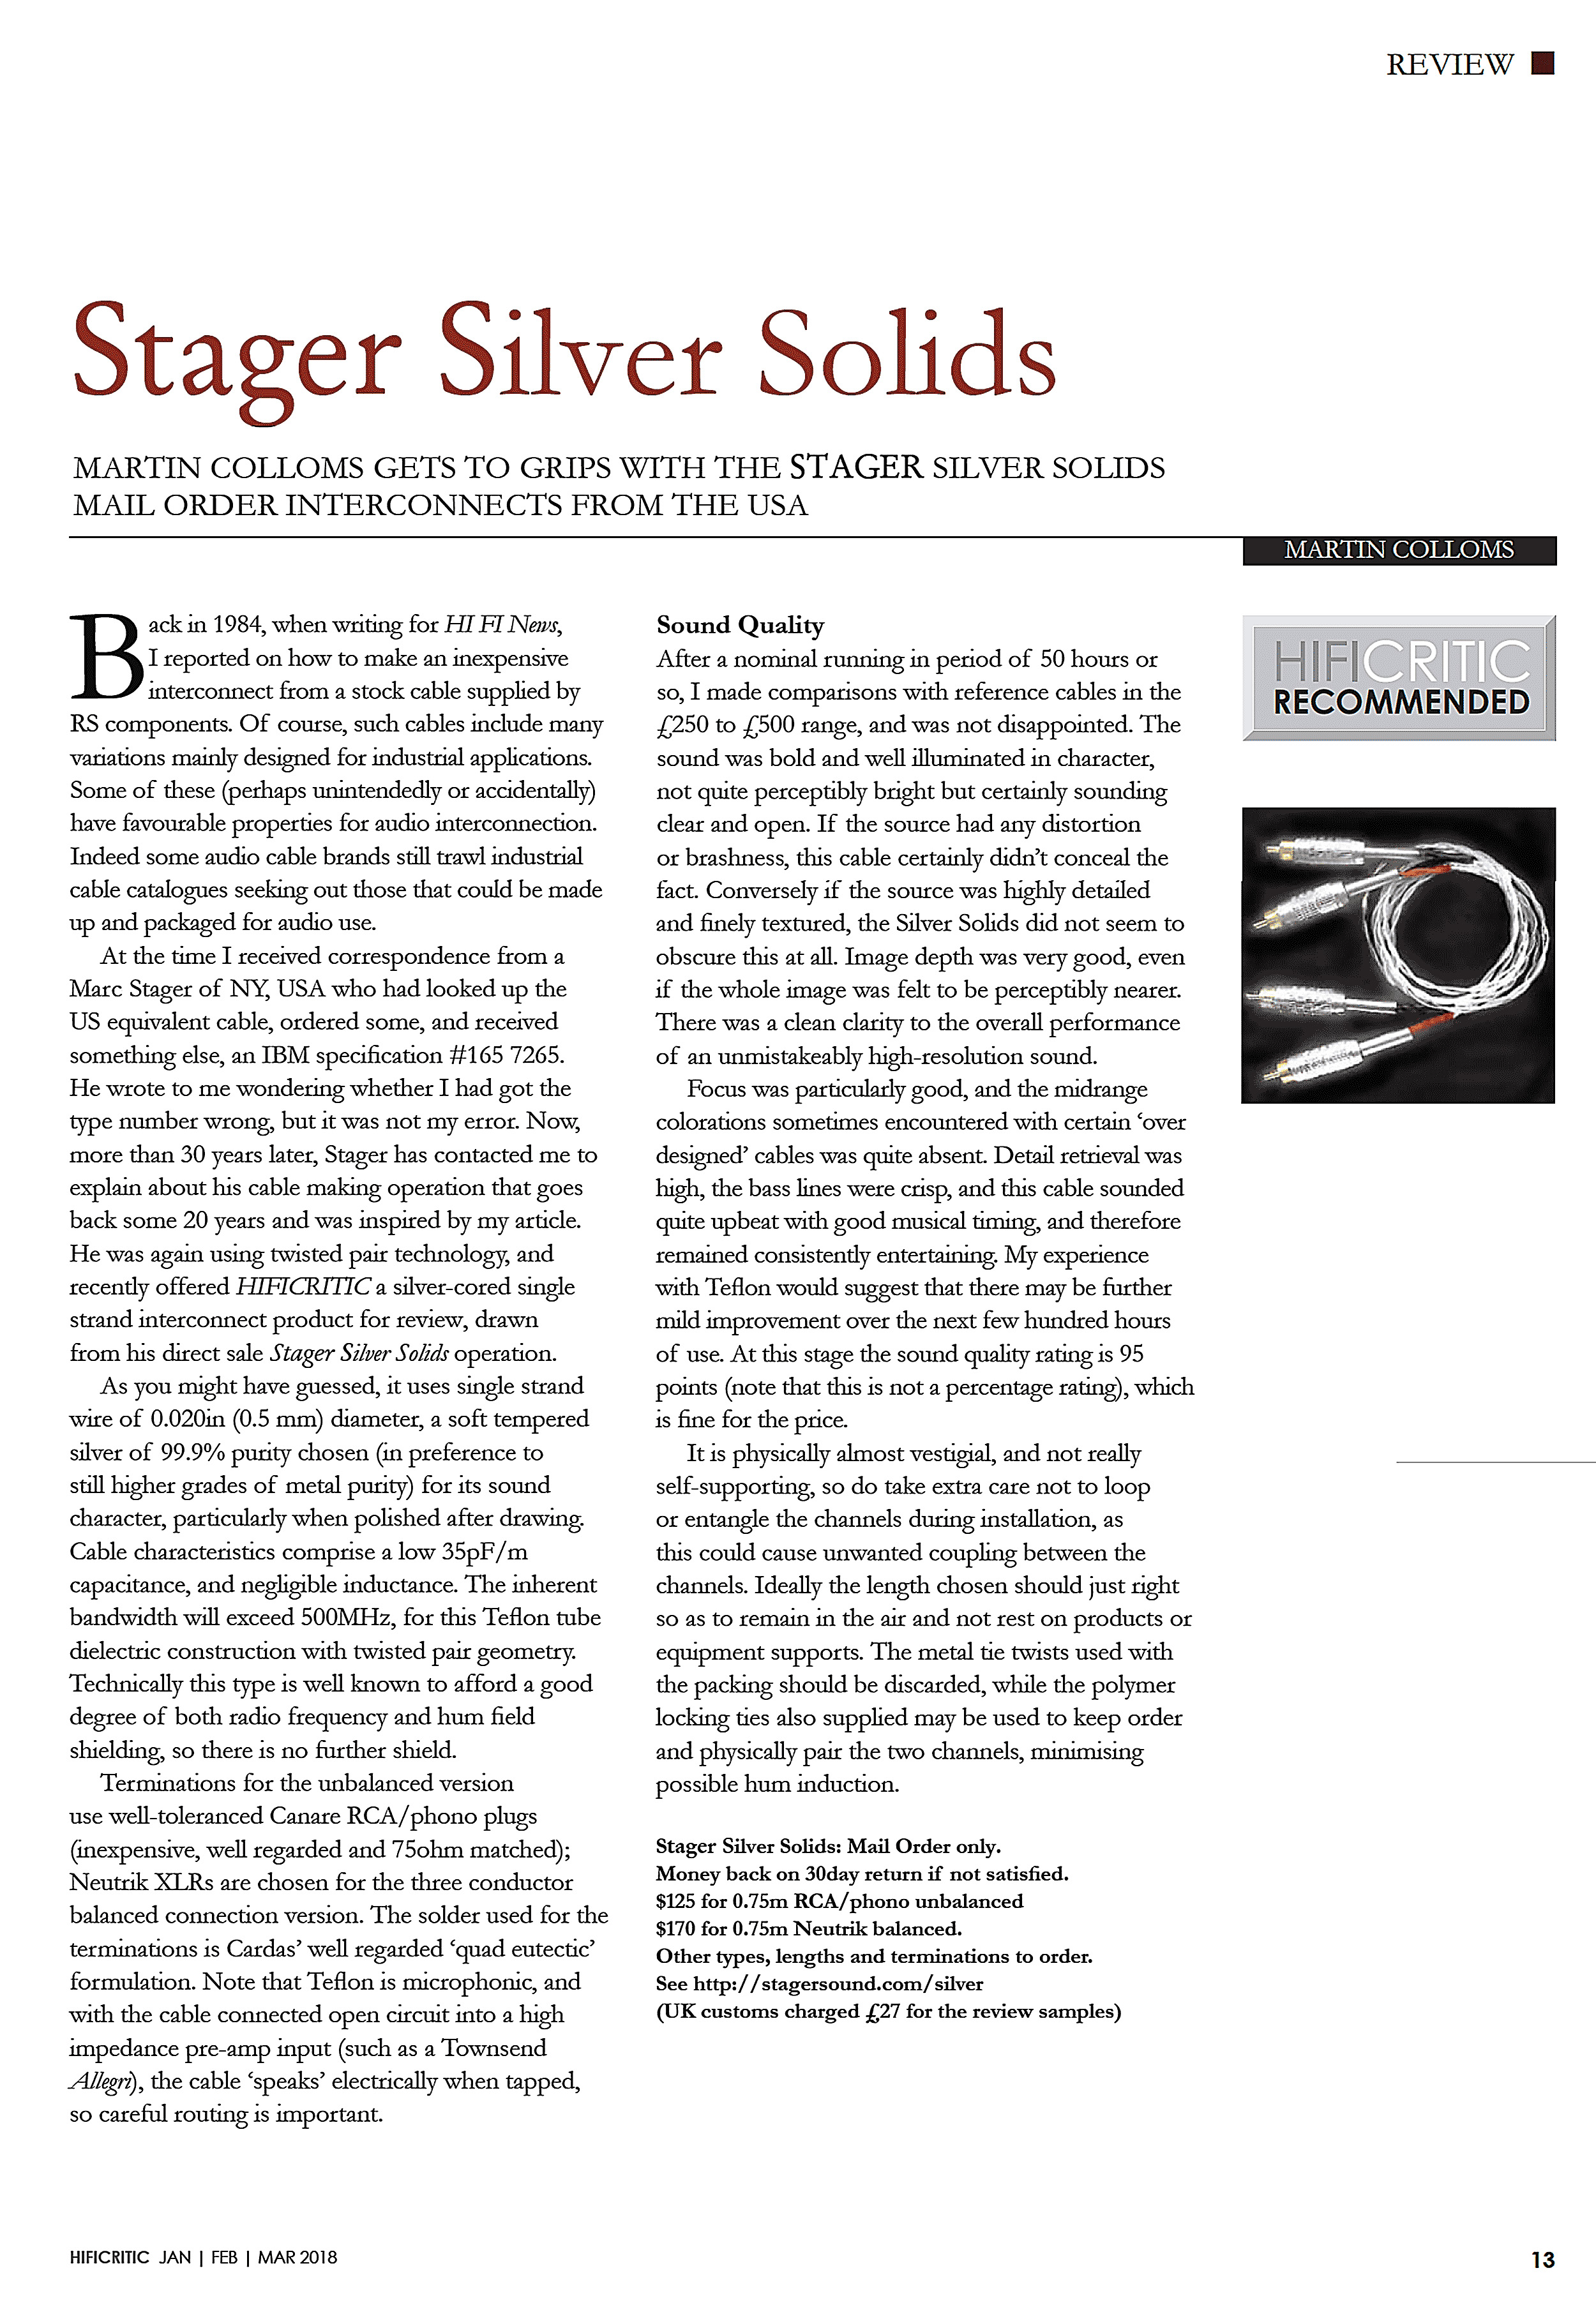 Stager Silver Solids HiFi Critic Review